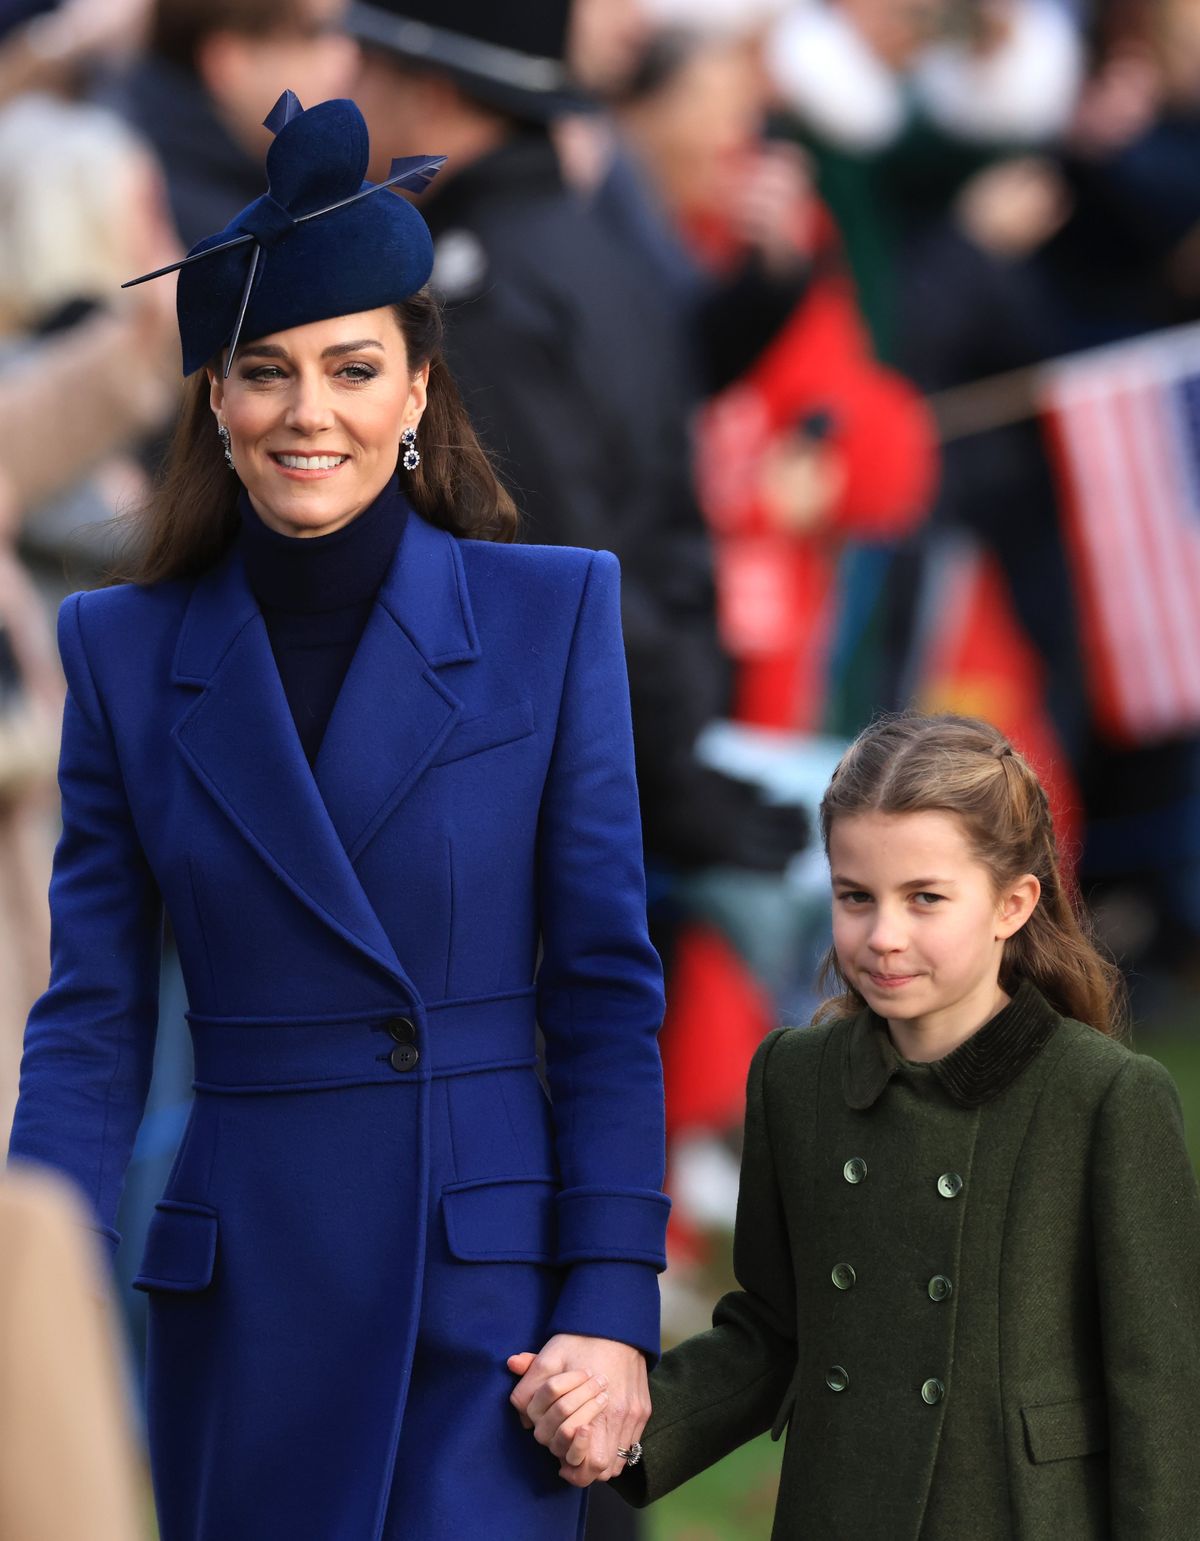 Catherine, Princess of Wales, left, and Princess Charlotte attend the Christmas morning service at Sandringham Church on Dec. 25 in Sandringham, Norfolk.  (Stephen Pond)